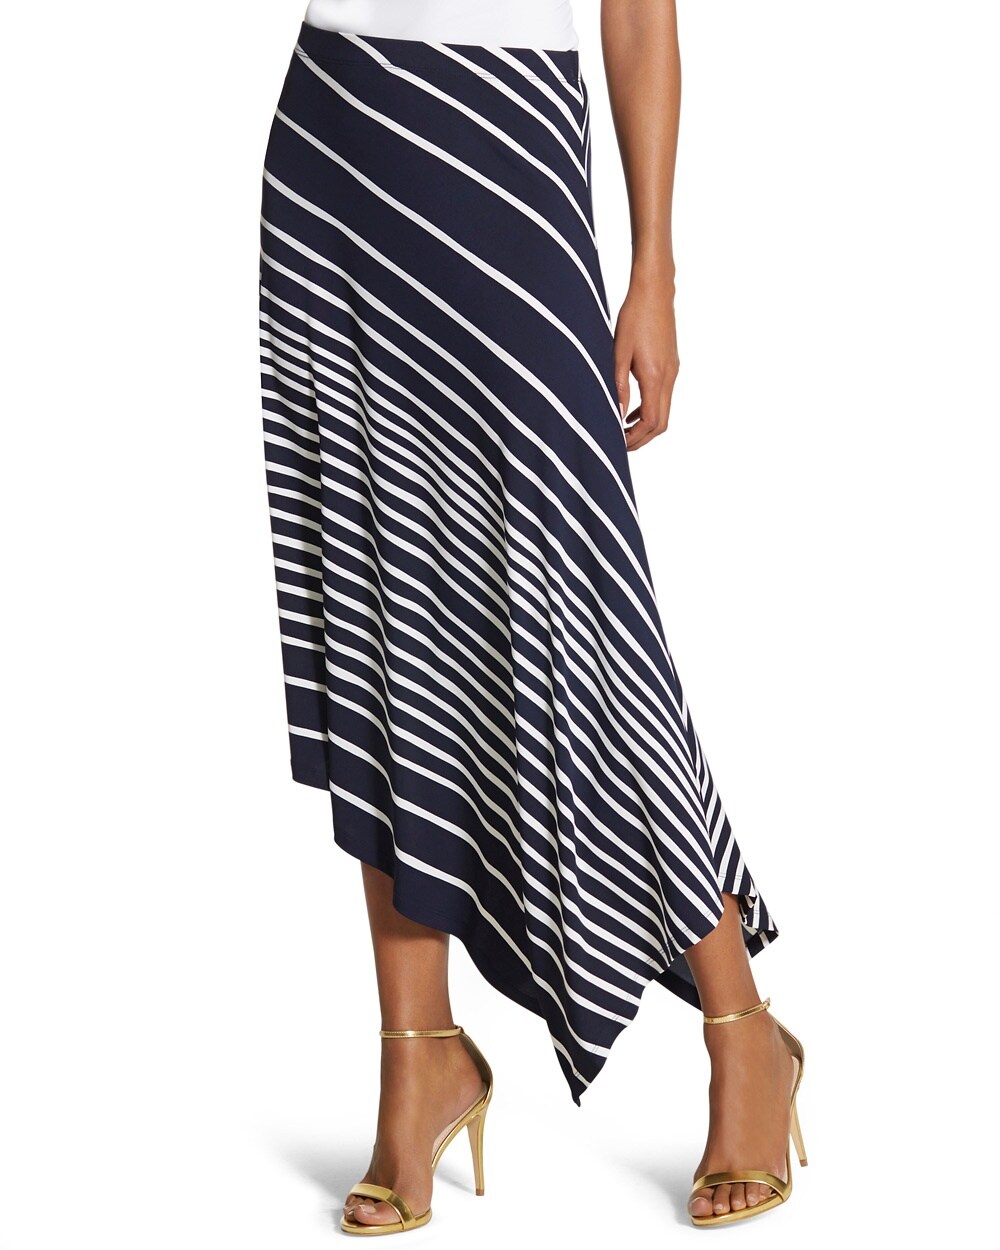 Knit Kit Striped Midi Skirt video preview image, click to start video